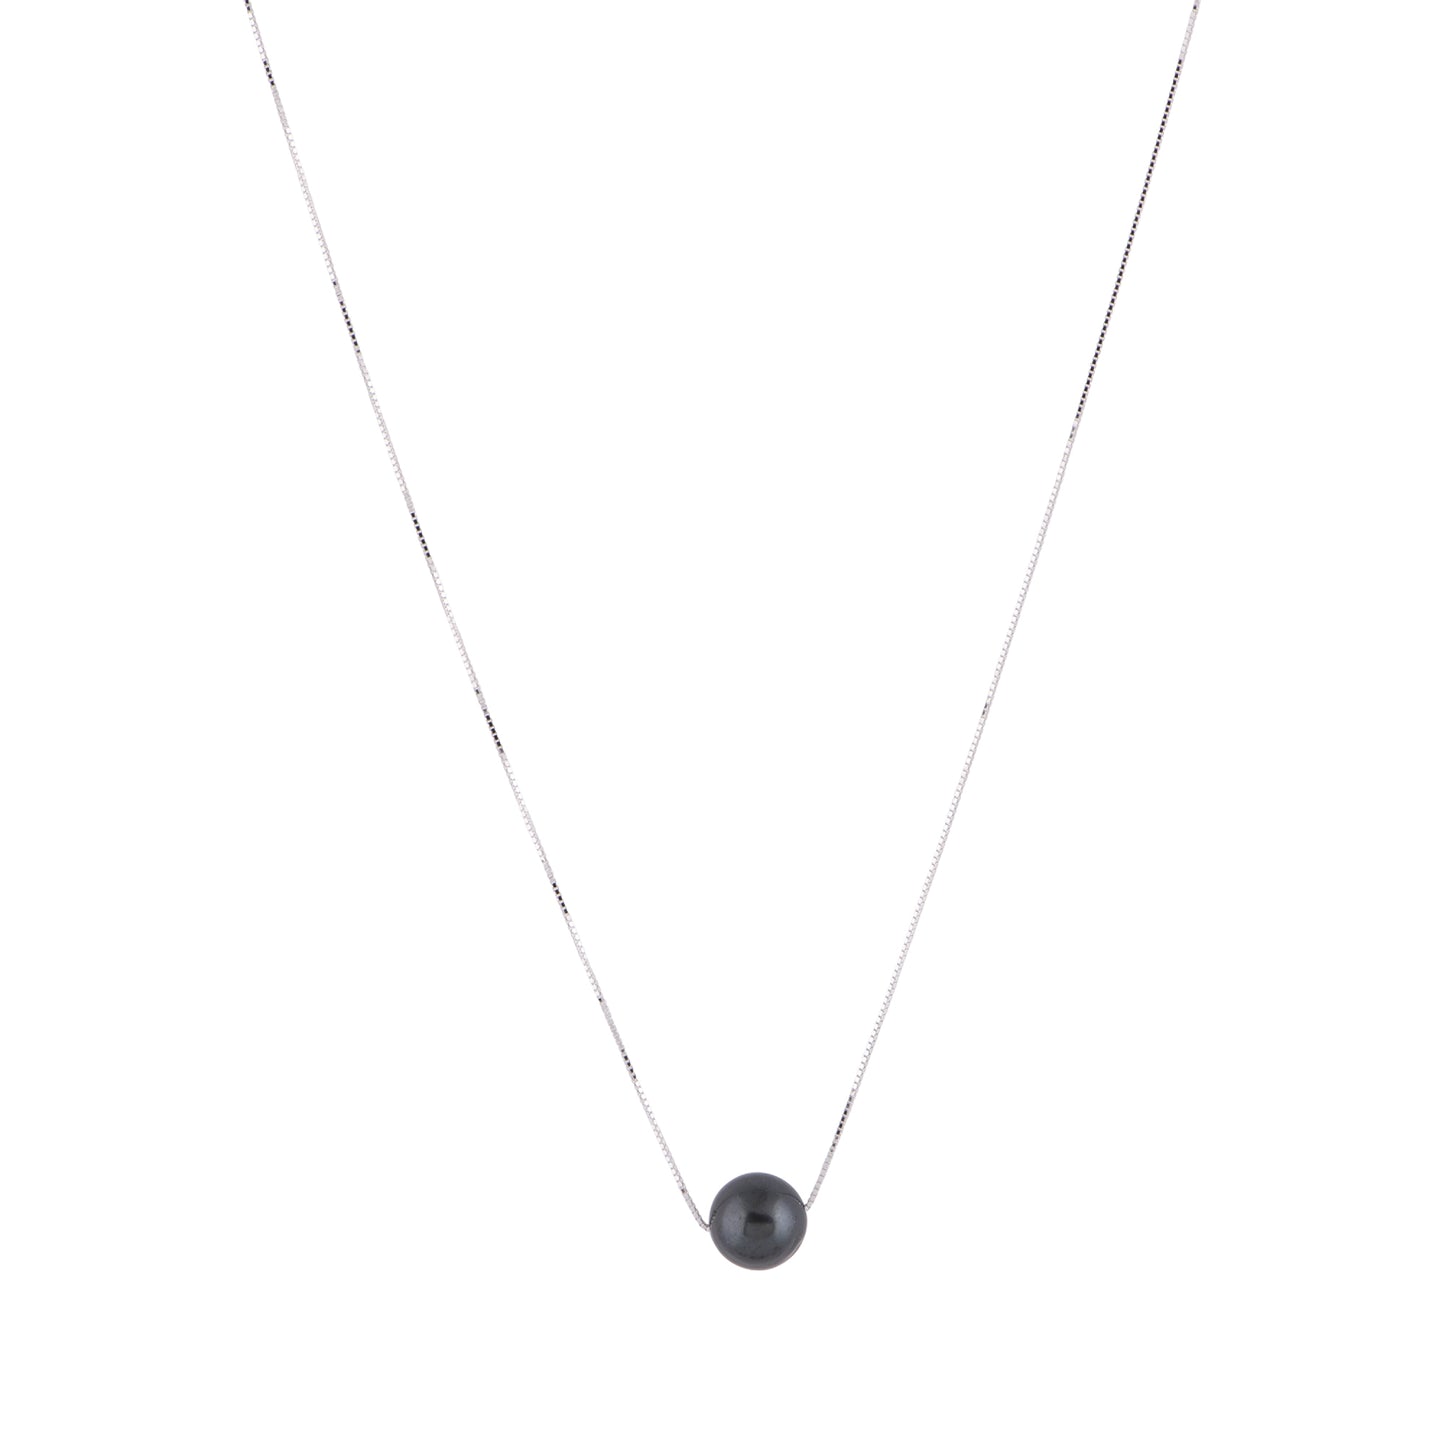 Kelly - Freshwater pearl and sterling silver necklace (Dark grey pearl)